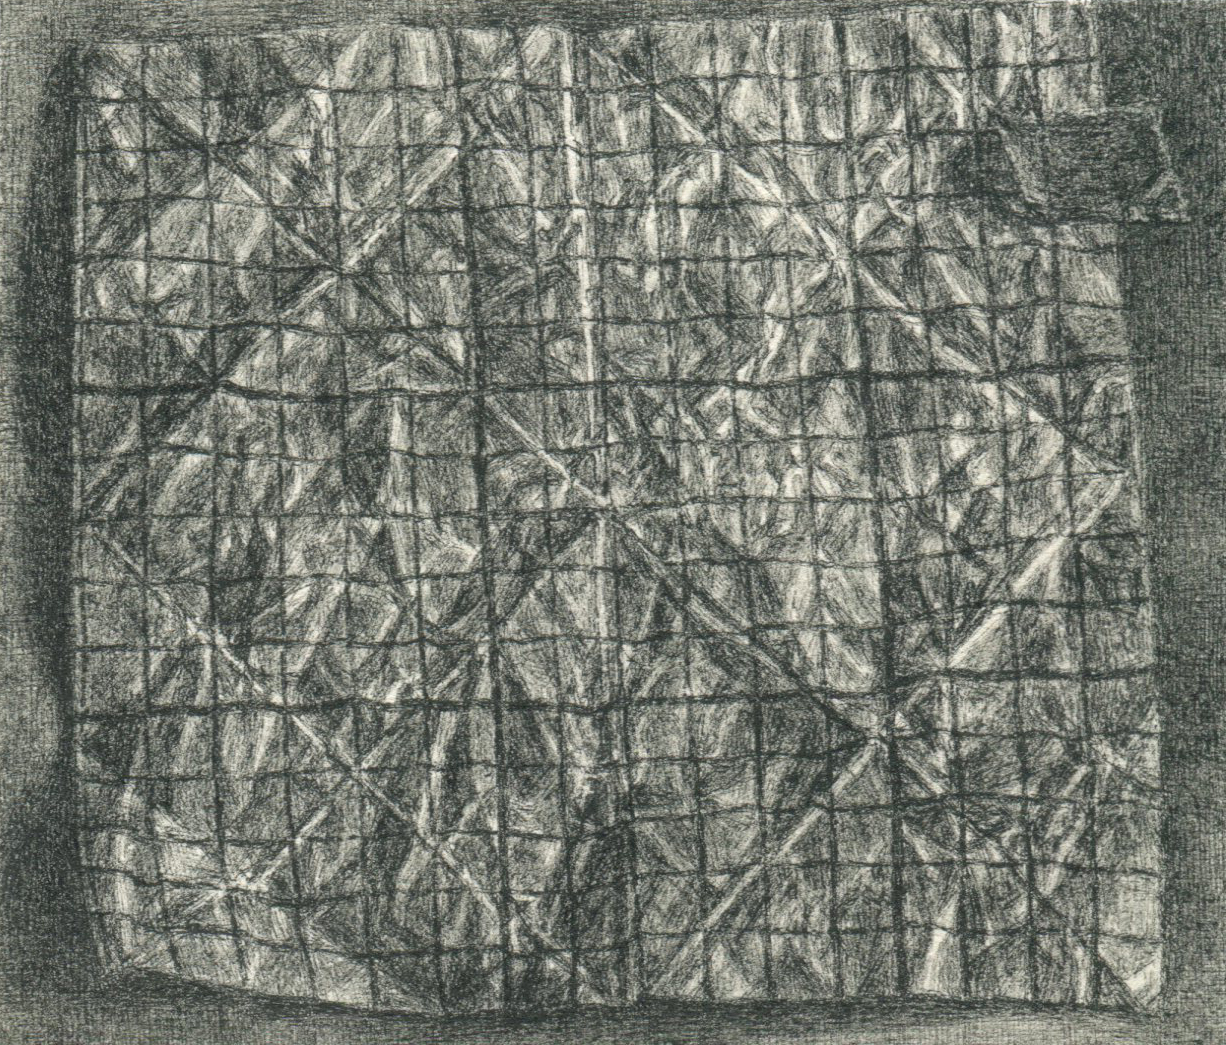  Folded Grid, Micron on Paper 5 ½ x 6 in. 2018   